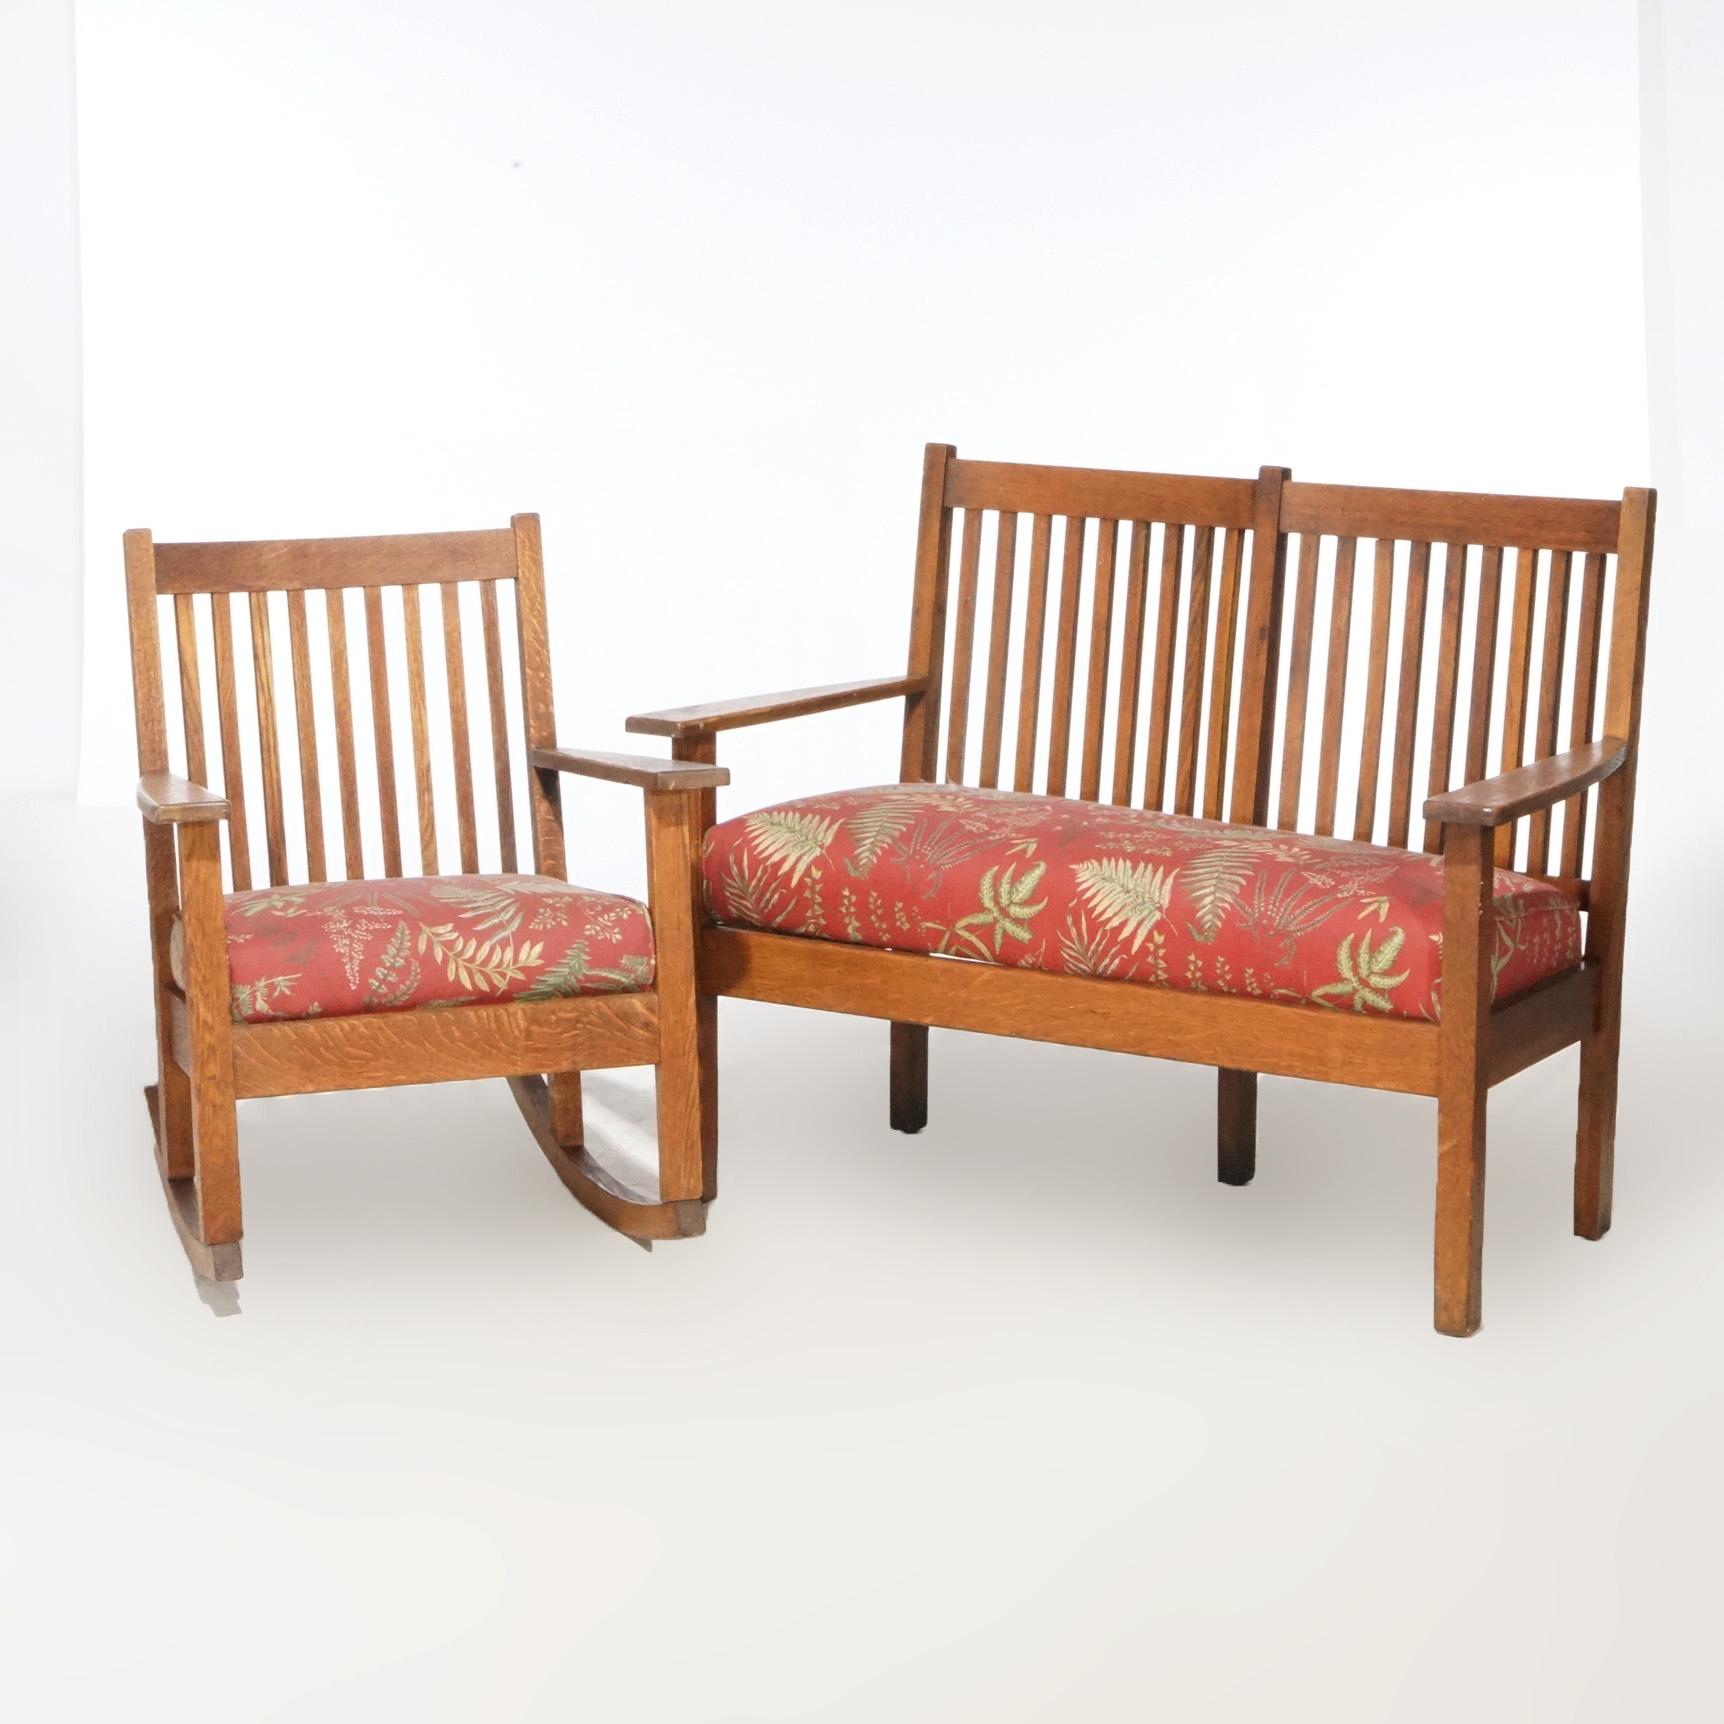 An Arts and Crafts Mission seating set in the manner of Stickley Bros. offers oak construction with spindle backs and upholstered seats; set includes rocking chair and settle; 20th century

Measures - Settle 35.25